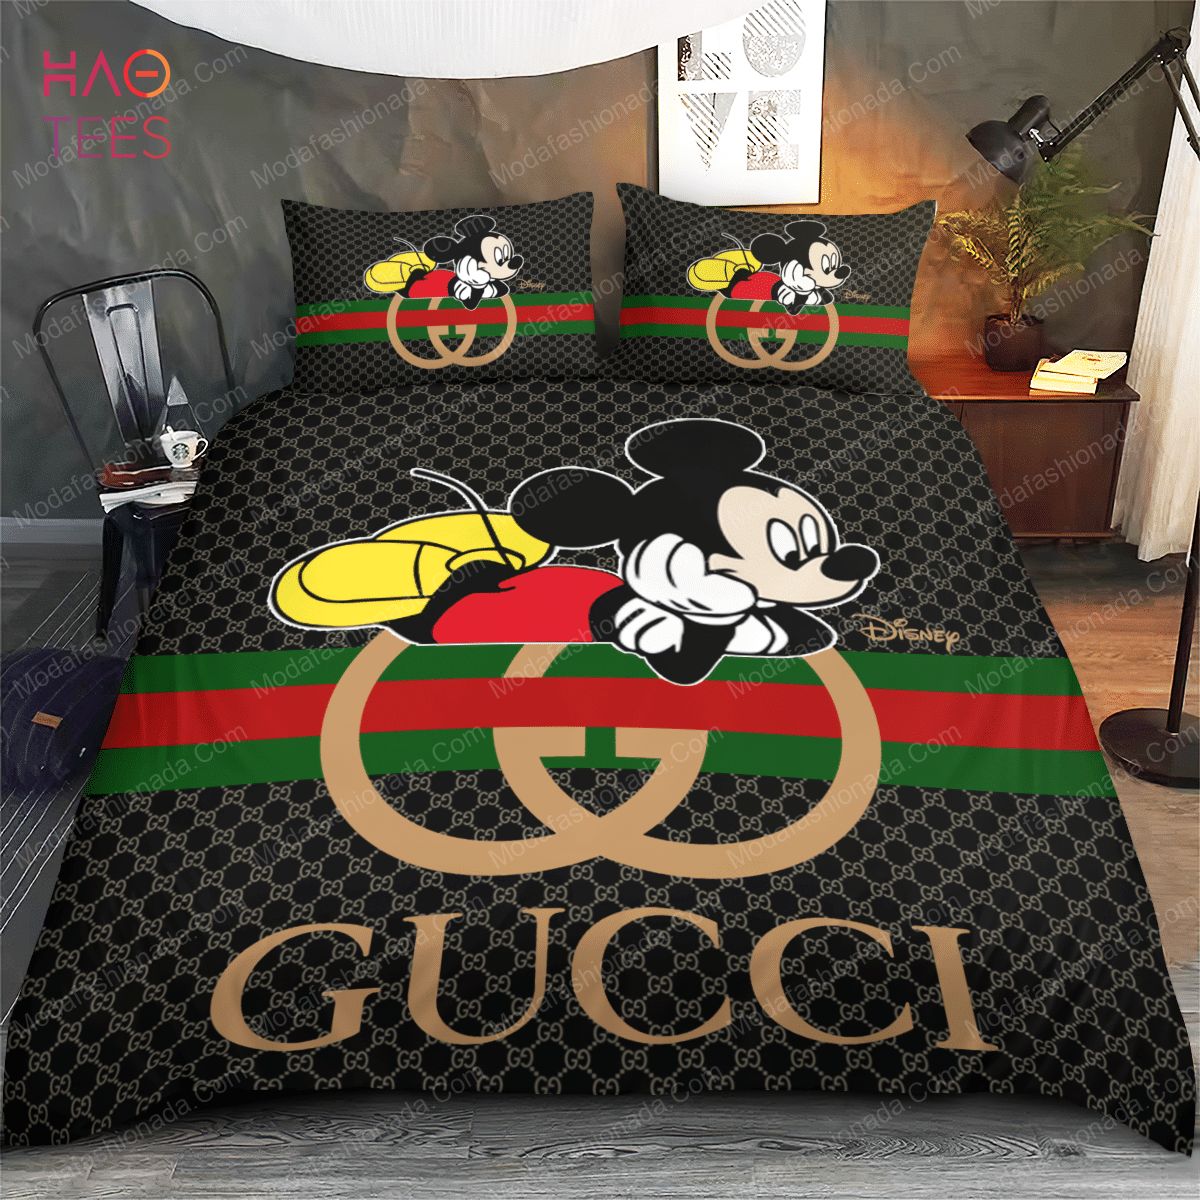 Gucci Mickey Mouse collection designs logo Bath Towel by Greens Shop -  Pixels